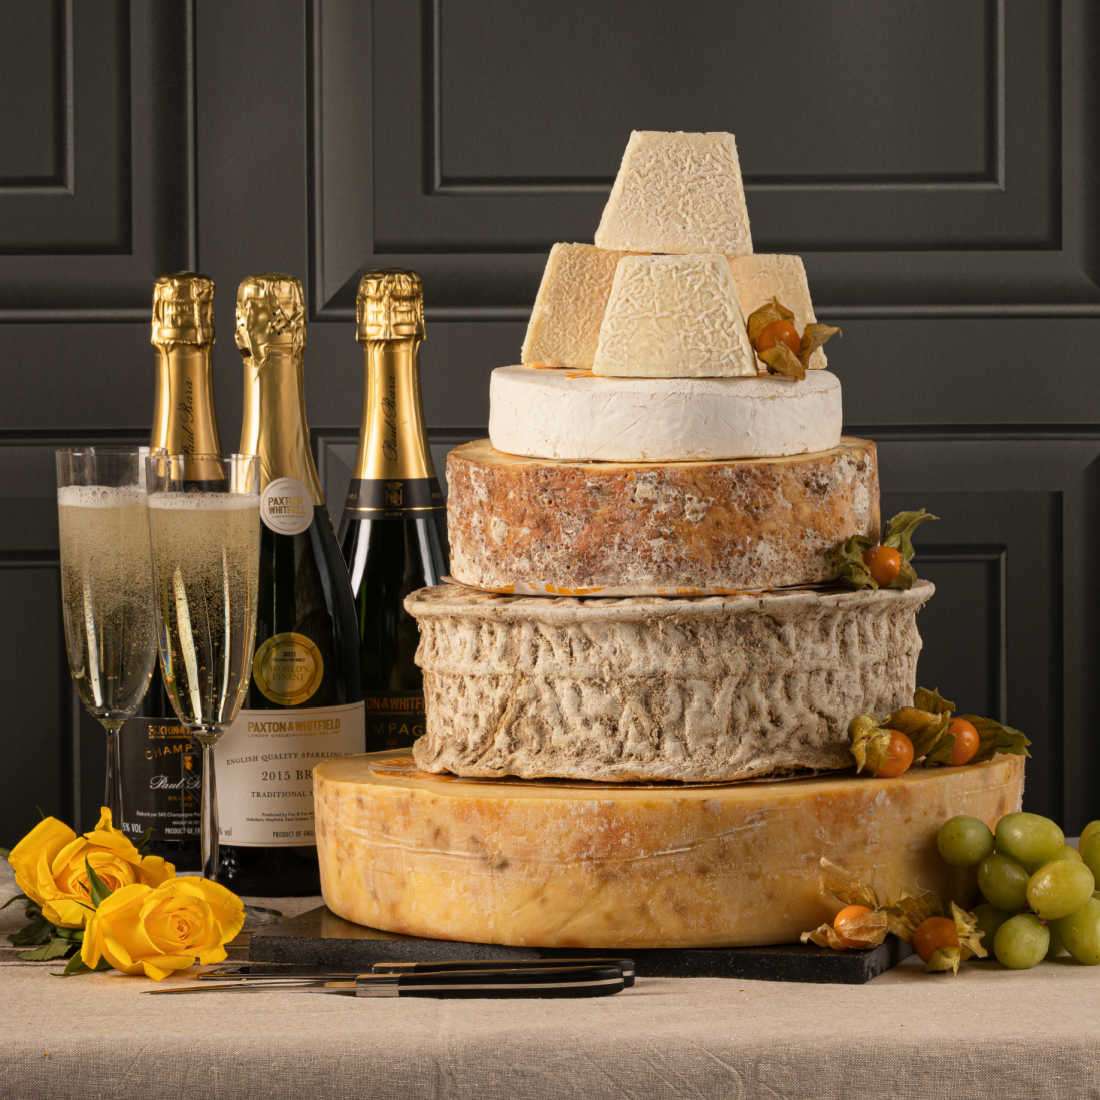 5 tiers of different cheeses emulating a wedding cake on a table with 3 bottle of champagne.